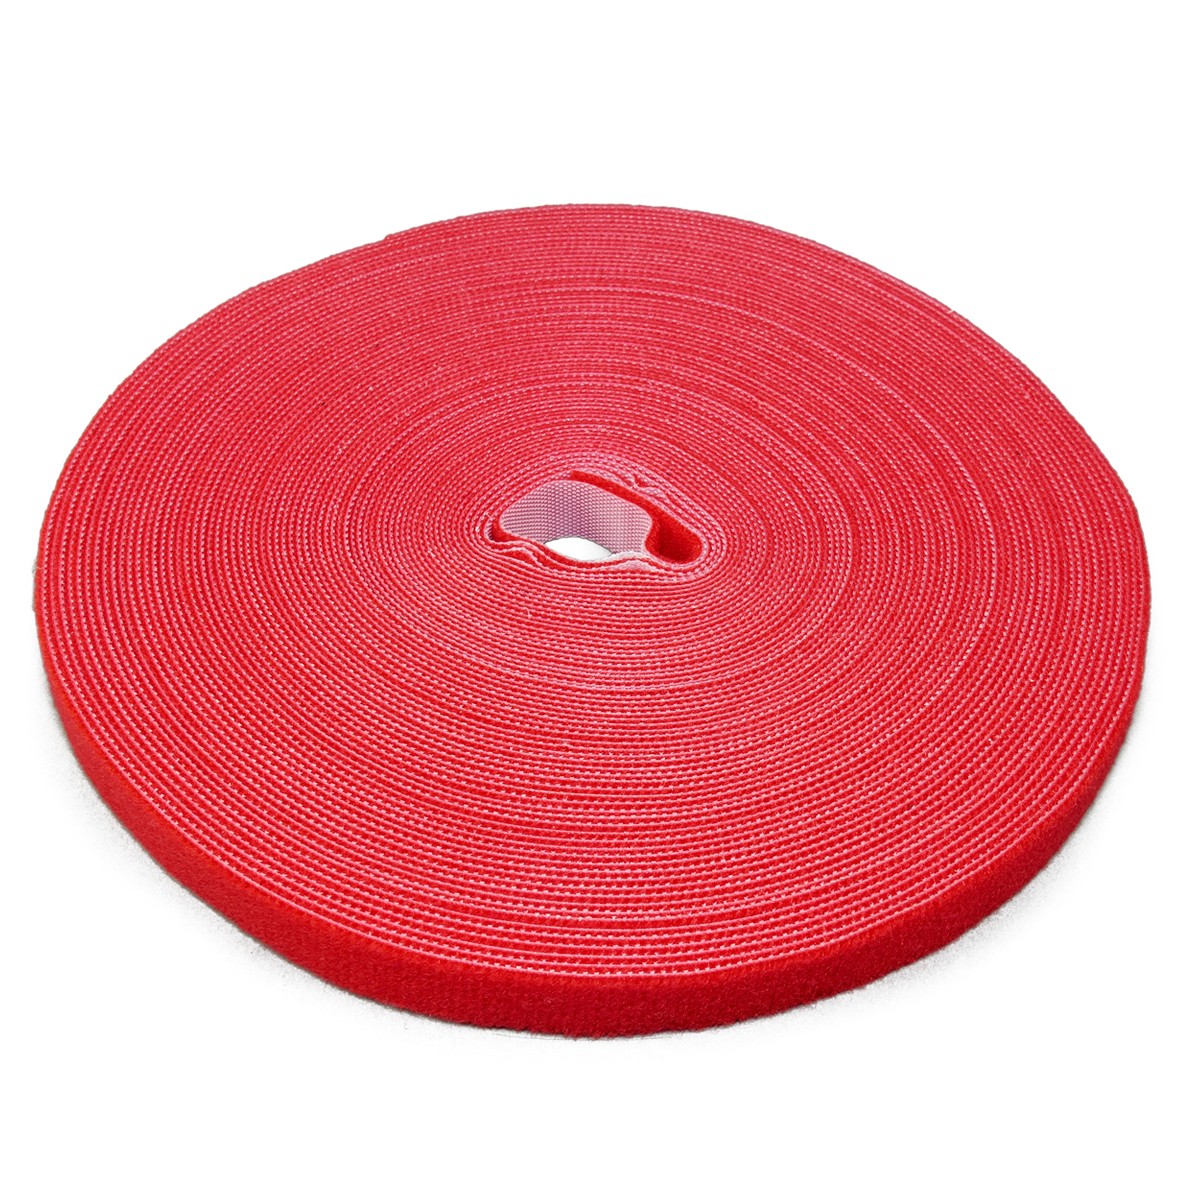 LTC Pro Roll, Cable Management Hook and Loop Tape (Red)